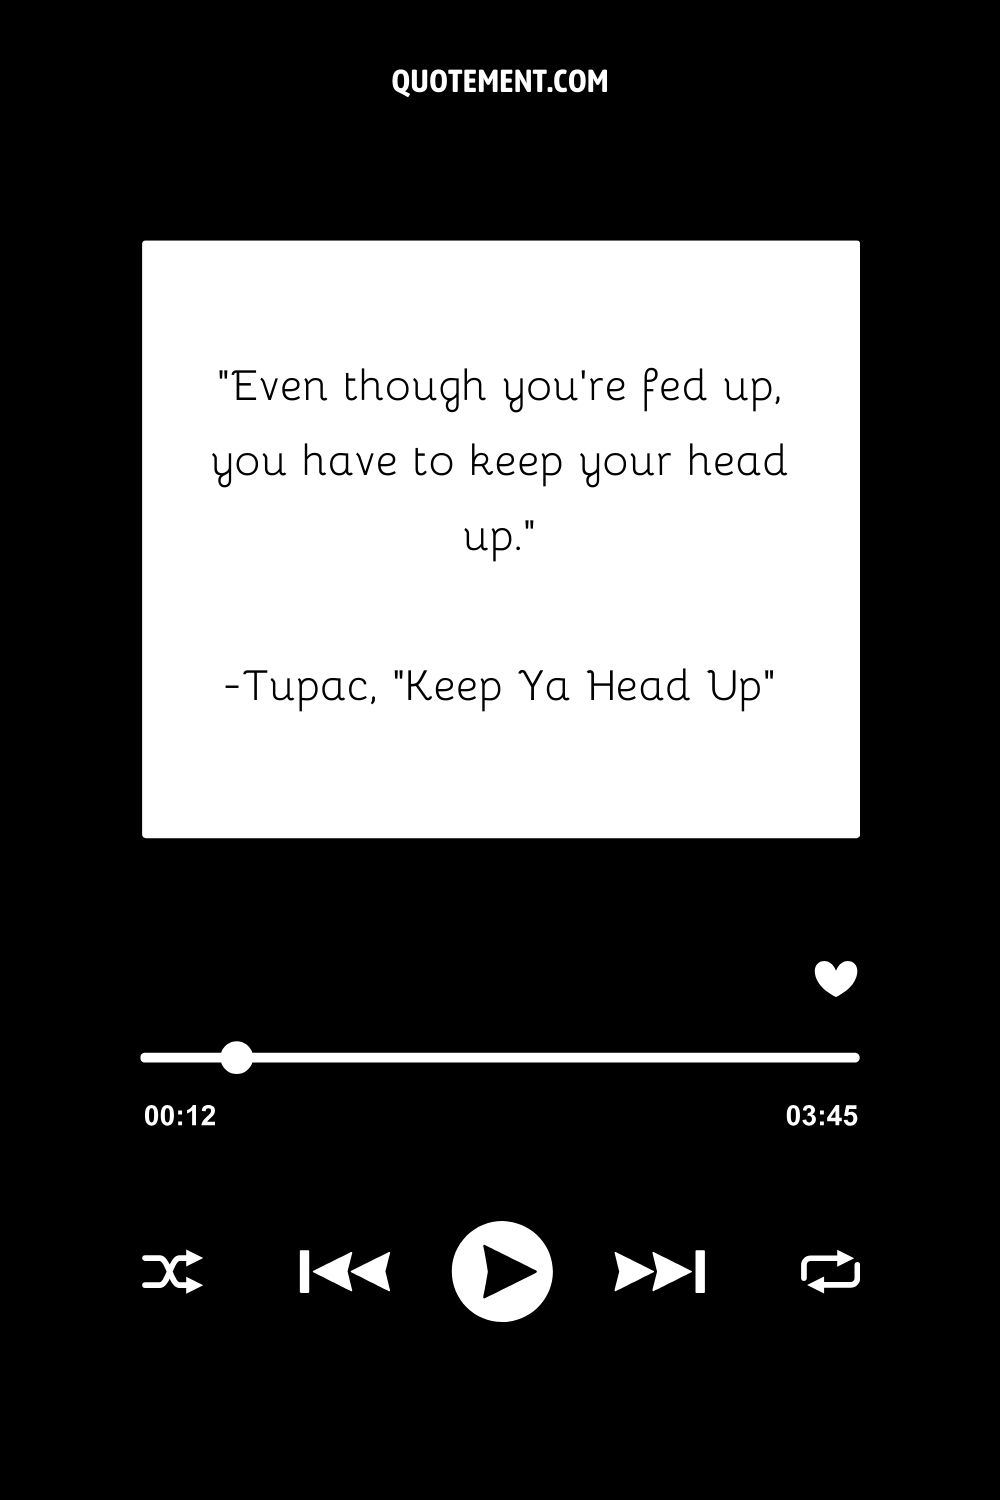 “Even though you’re fed up, you have to keep your head up.” — Tupac, “Keep Ya Head Up”